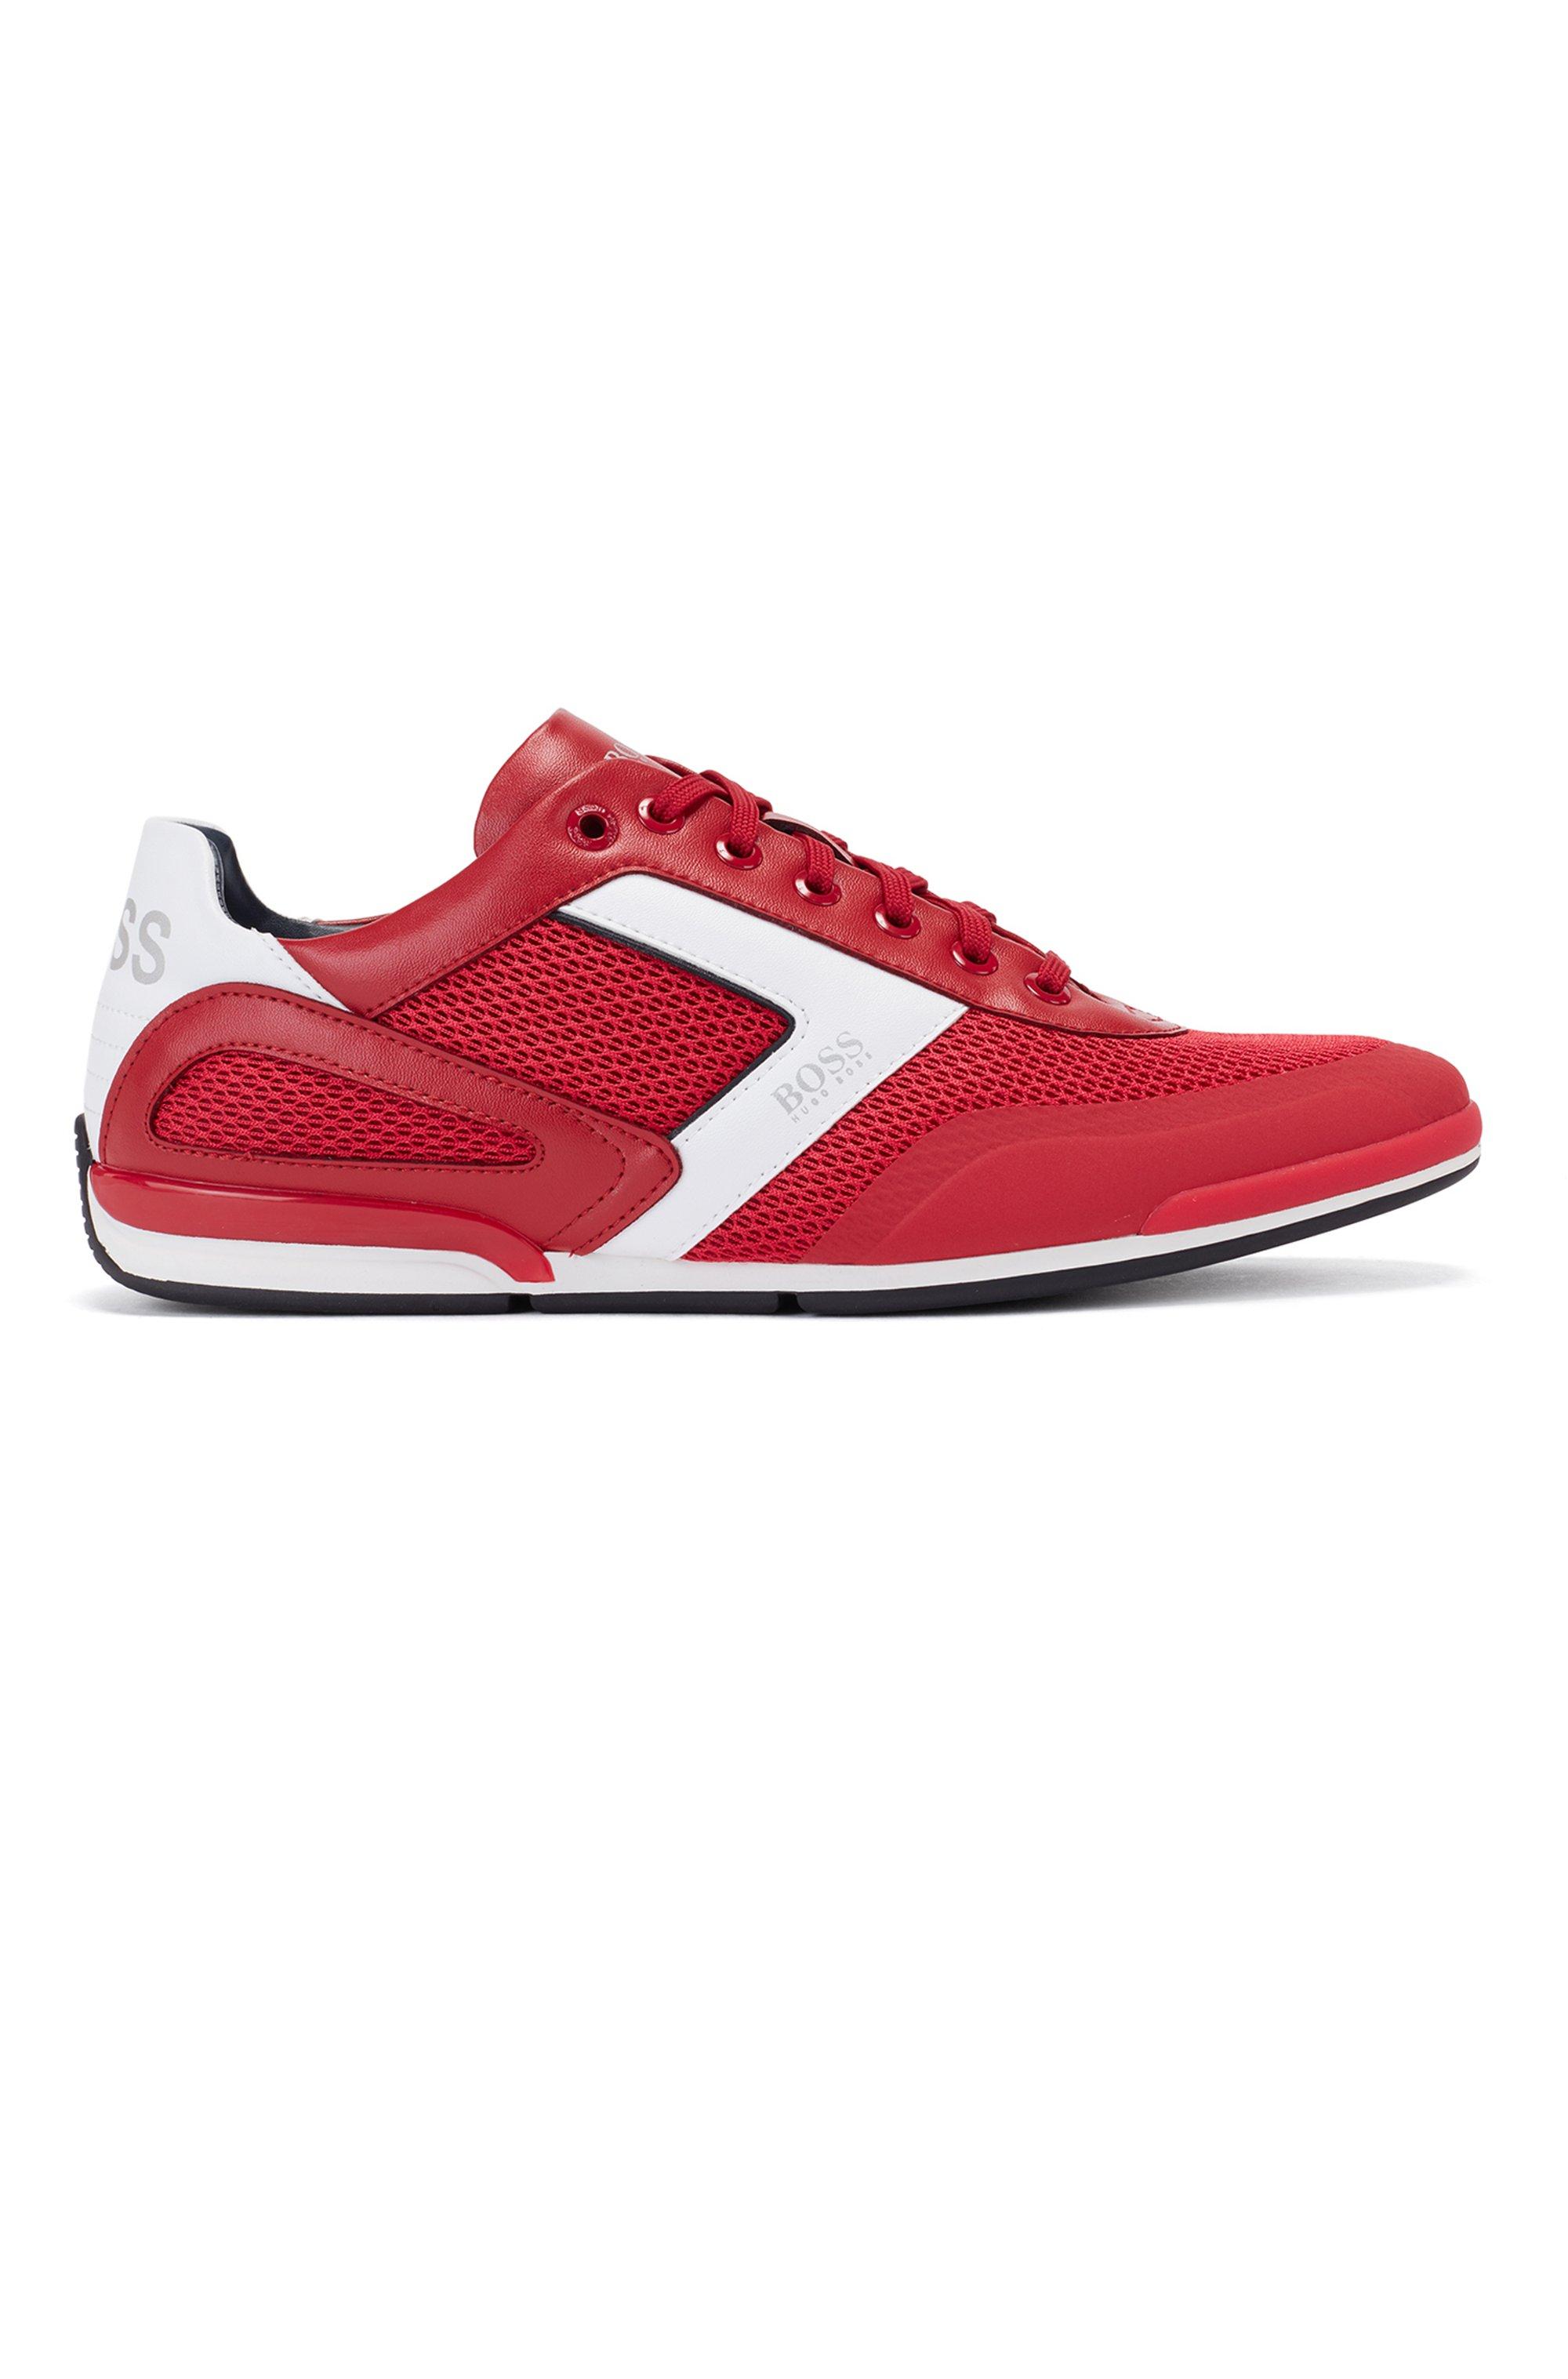 BOSS by HUGO BOSS Hybrid Trainers With Reflective Details And Backtab Logo-  Red Men's Sneakers Size 11 for Men | Lyst